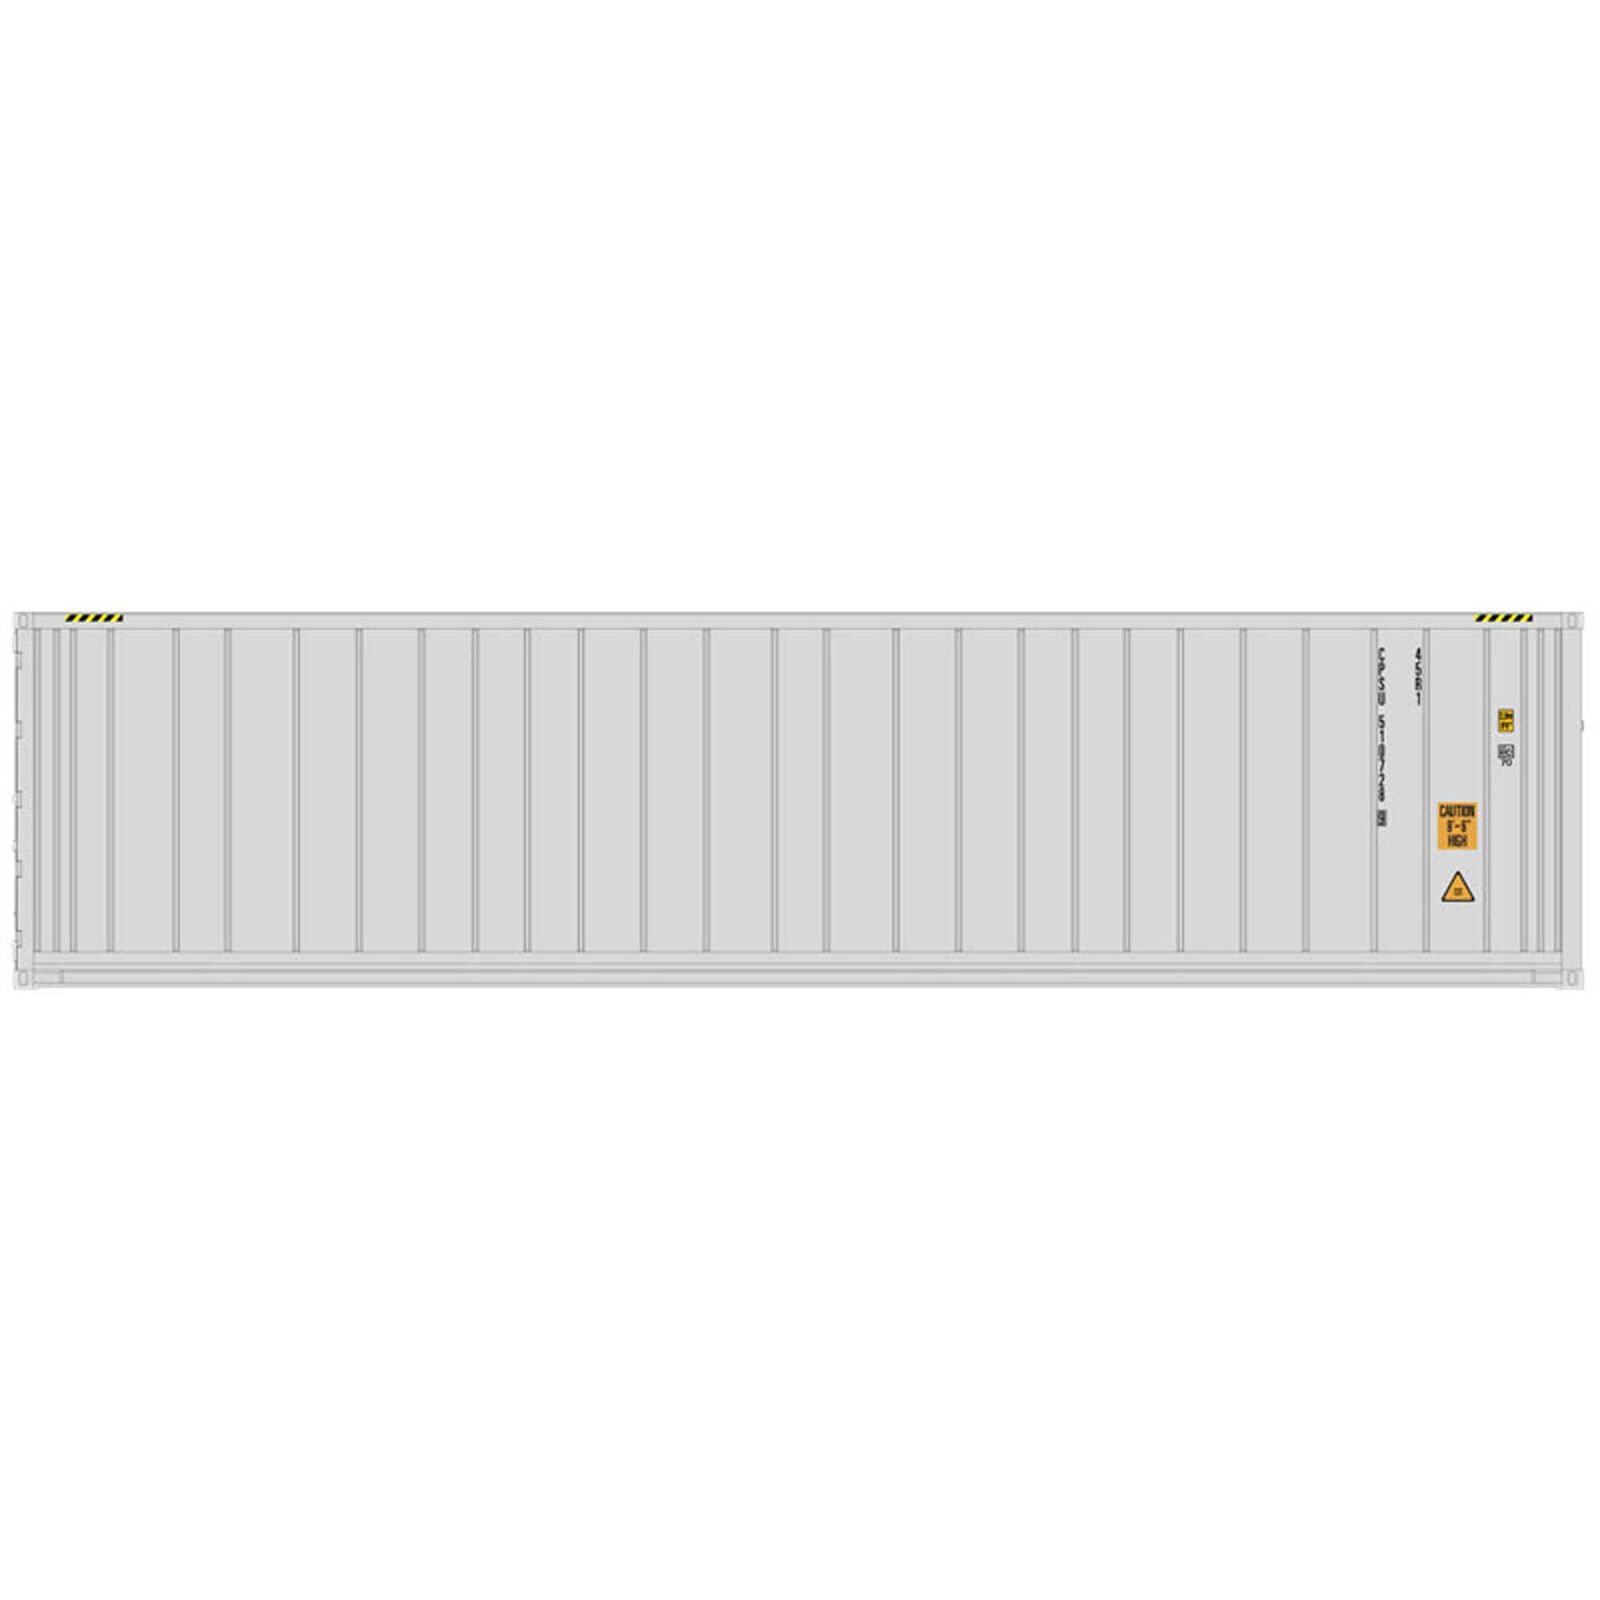 HO 40' Refrigerated Container 3PK CP Ships Set #2